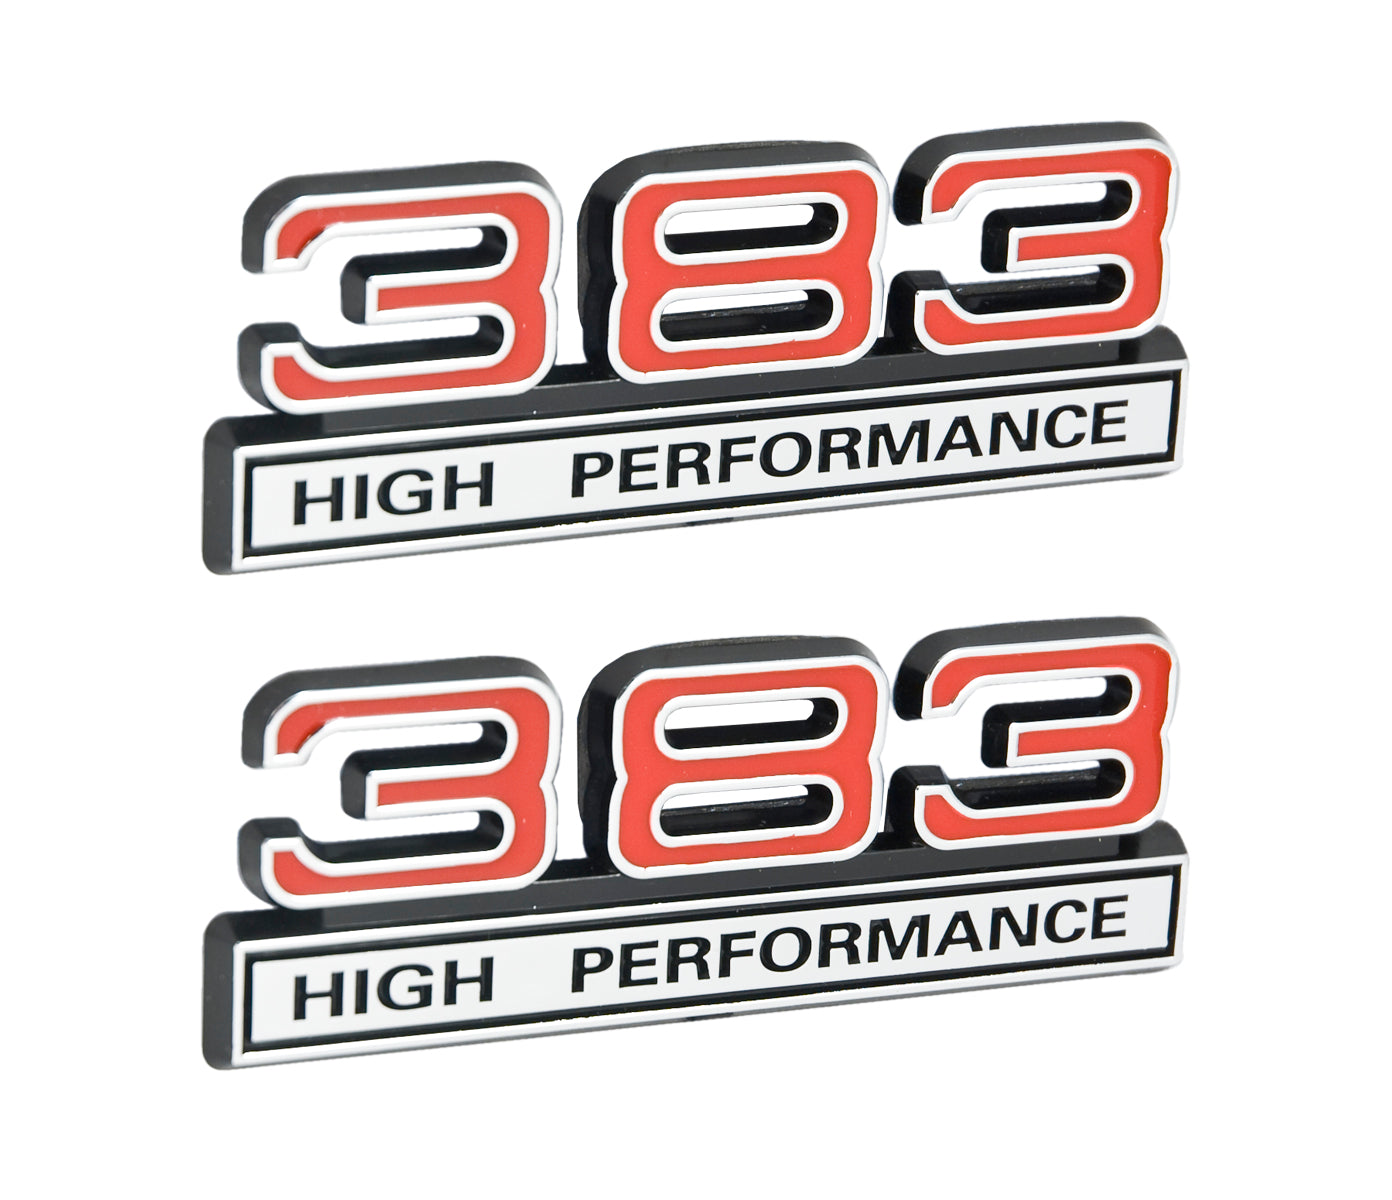 383 High Performance 6.2L Engine Emblems Badges in Chrome & Red - 4" Long Pair